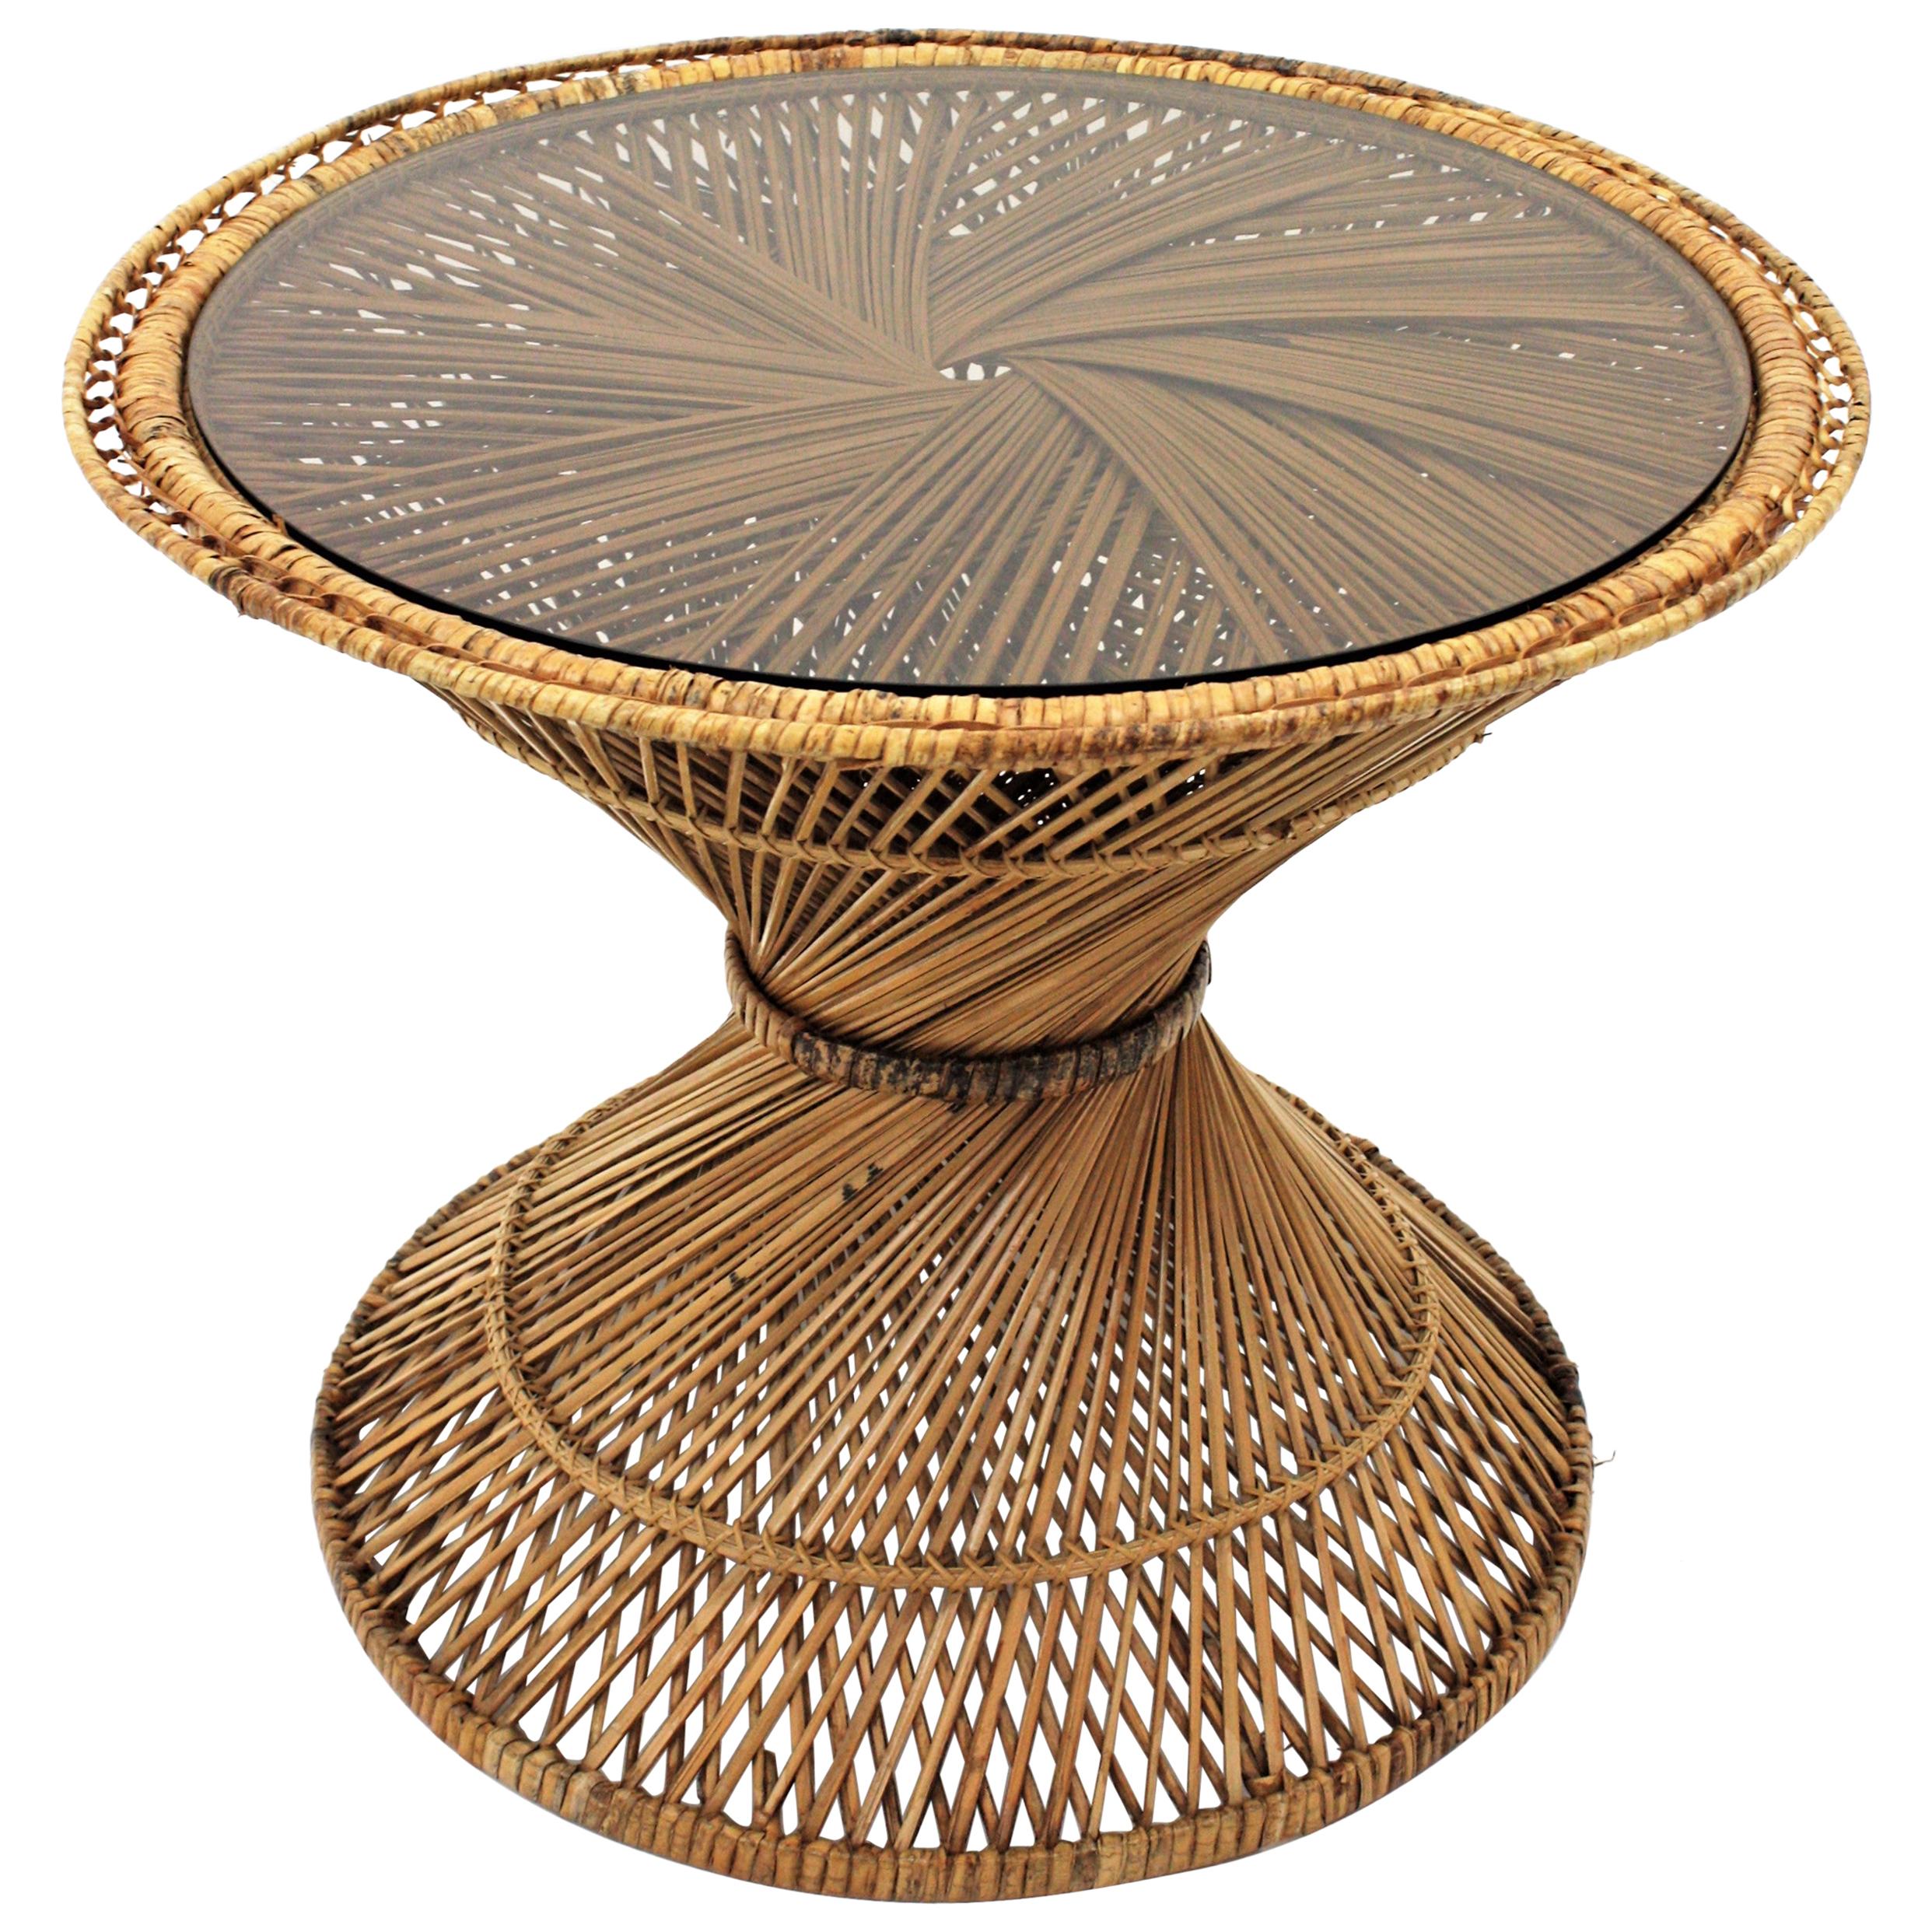 Woven Wicker and Rattan Emmanuelle Peacock Coffee Table, Spain, 1960s For Sale